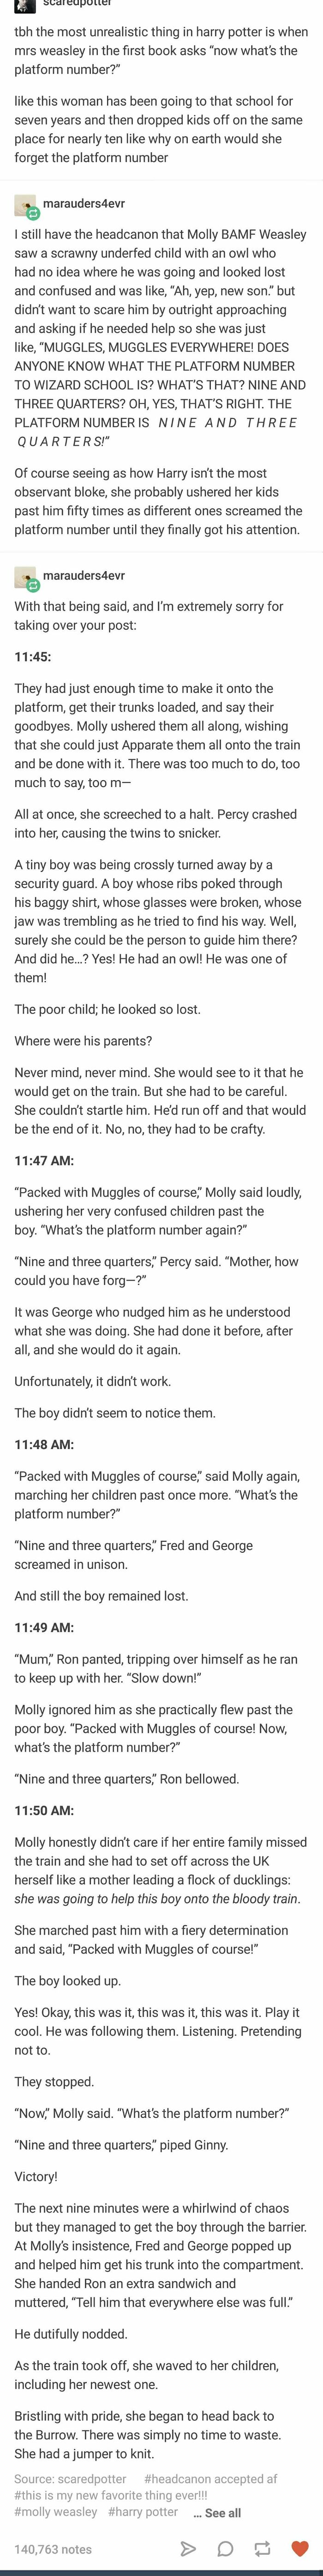 In Case Anyone Is Still Wondering Why Molly Was Asking About The Platform Number